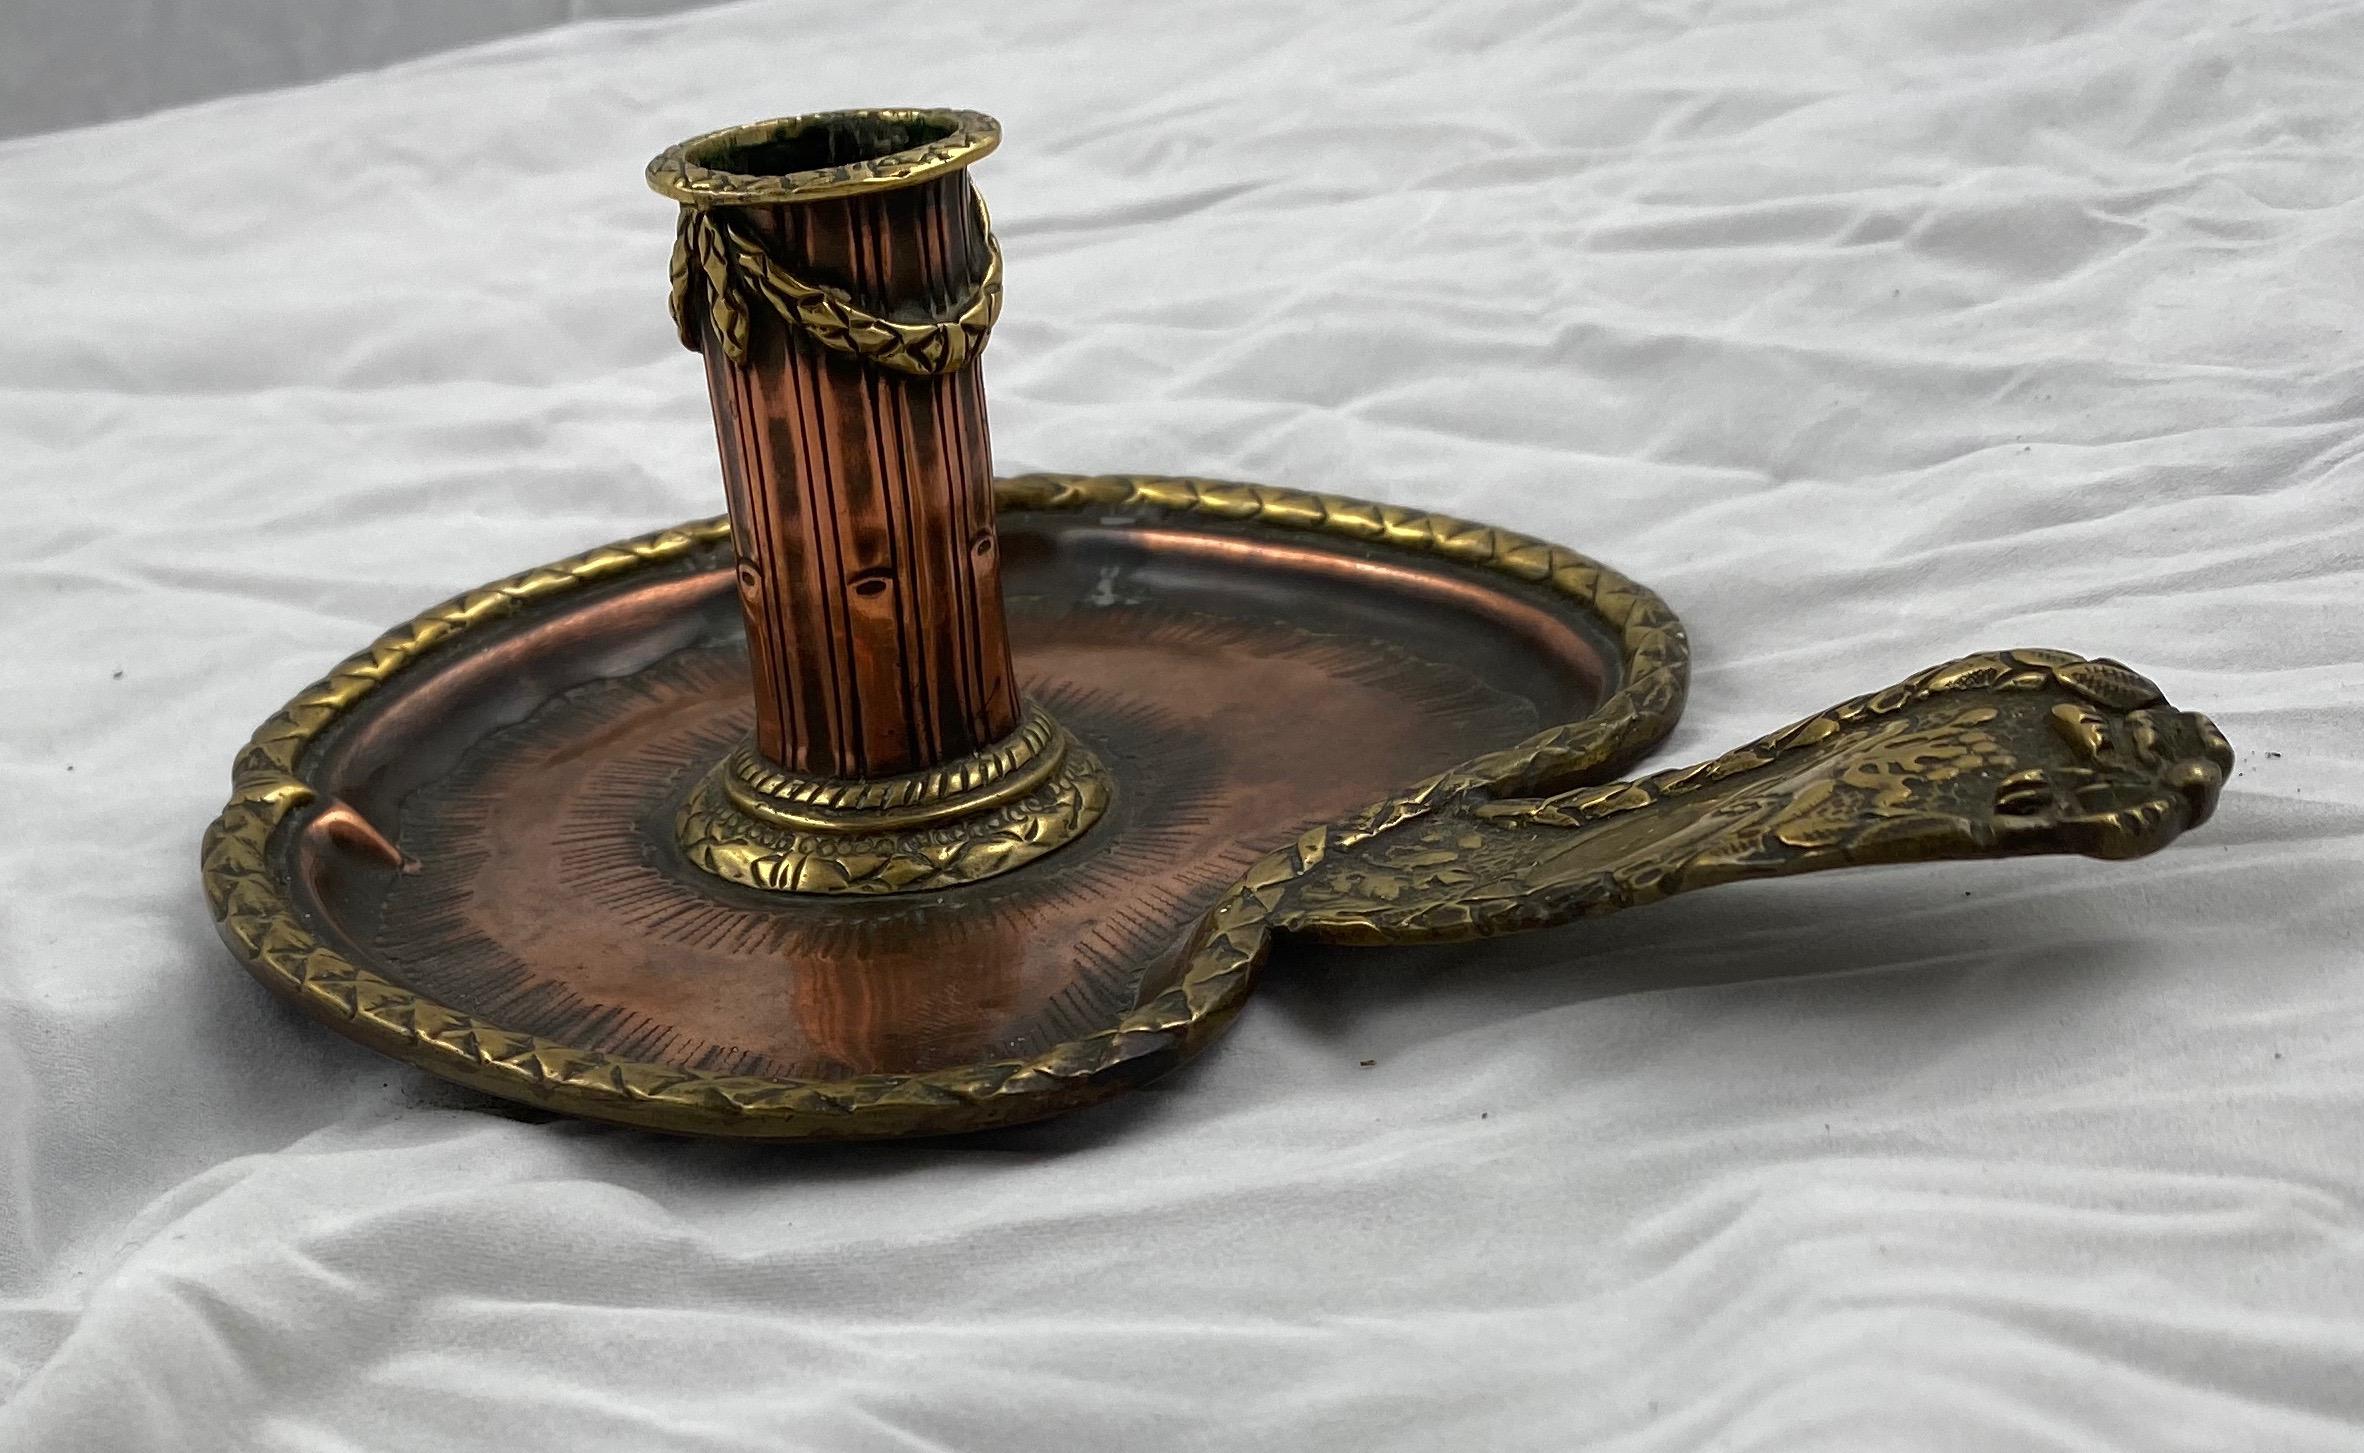 A small and sweet candlestick made of copper and brass.